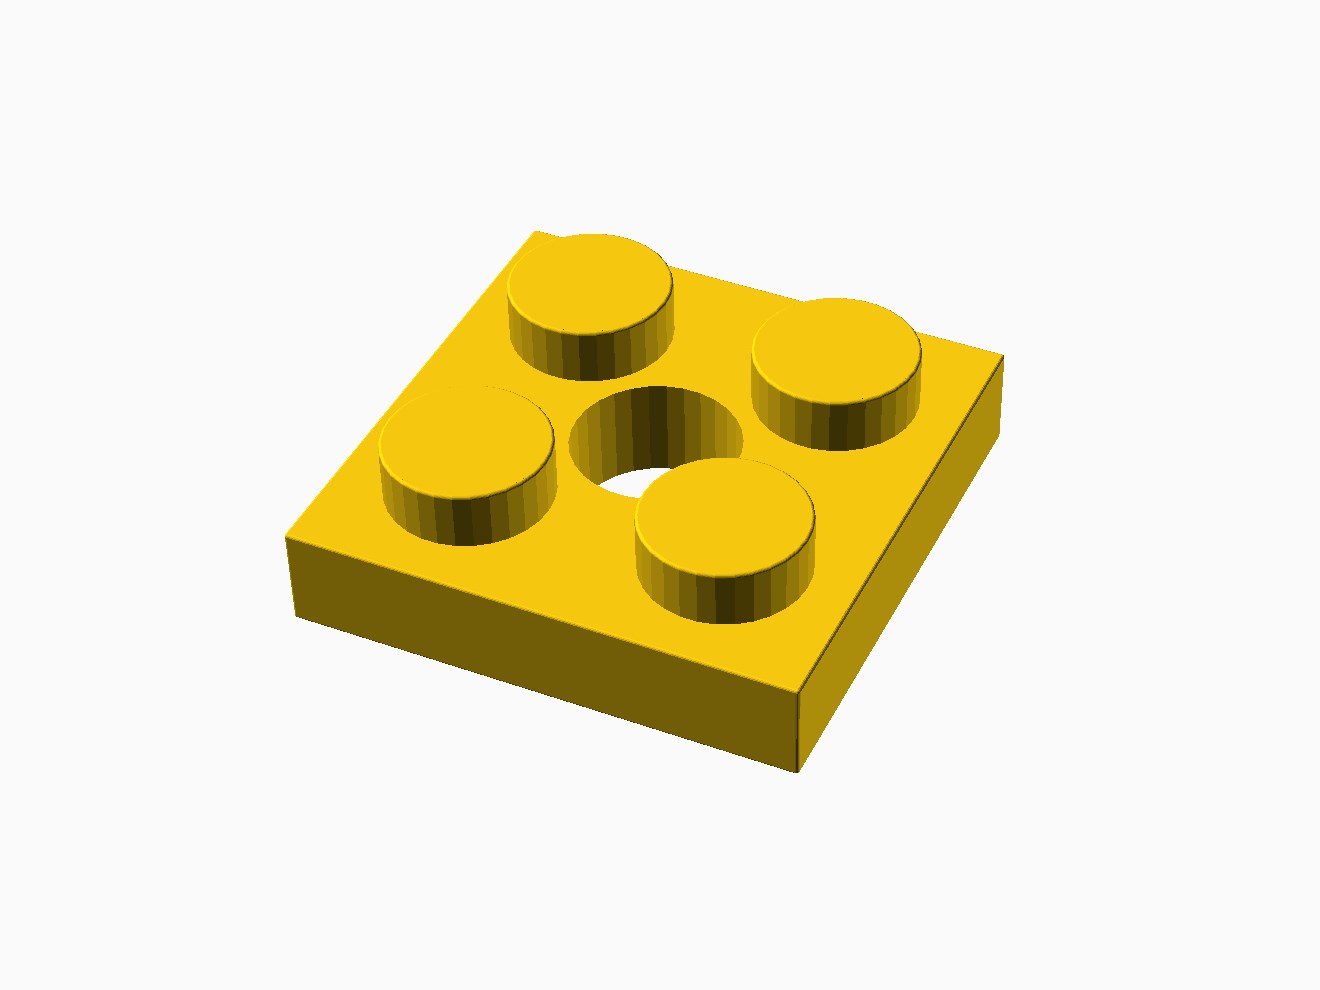 3D printable model of a LEGO Technic 2x2 Plate.